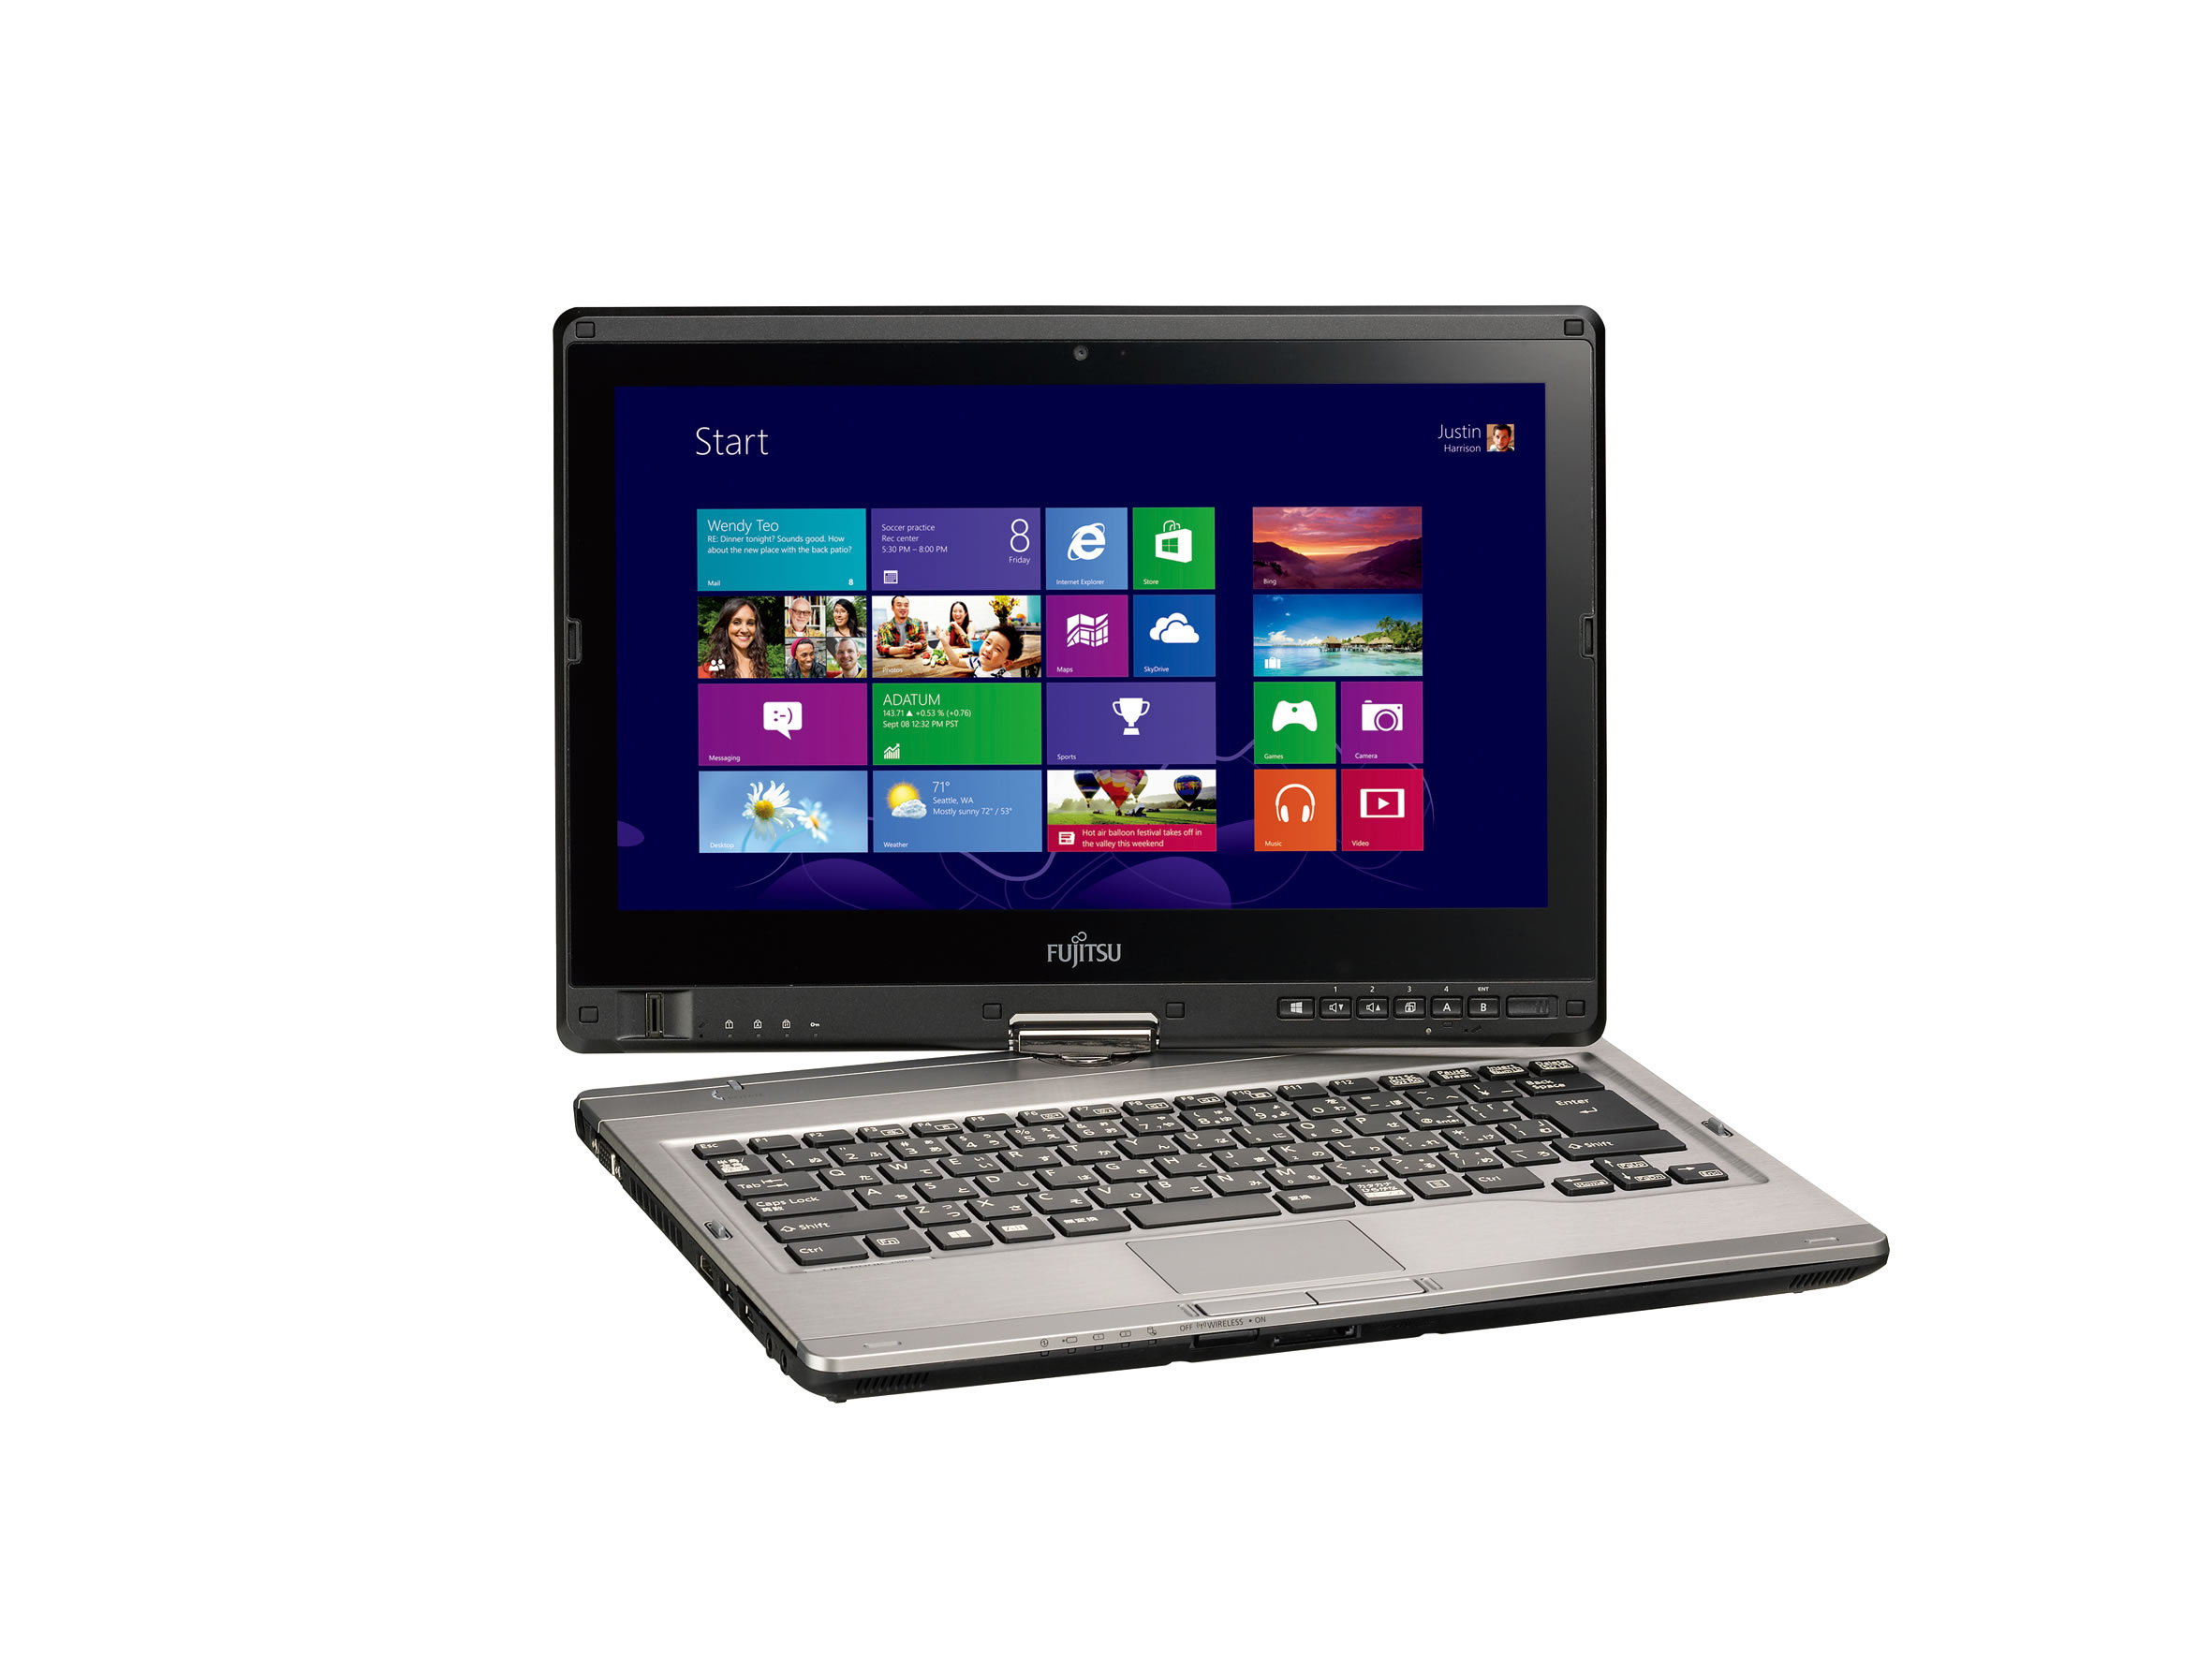 Fujitsu Releases 23 New PC Models Equipped With Windows 8 for